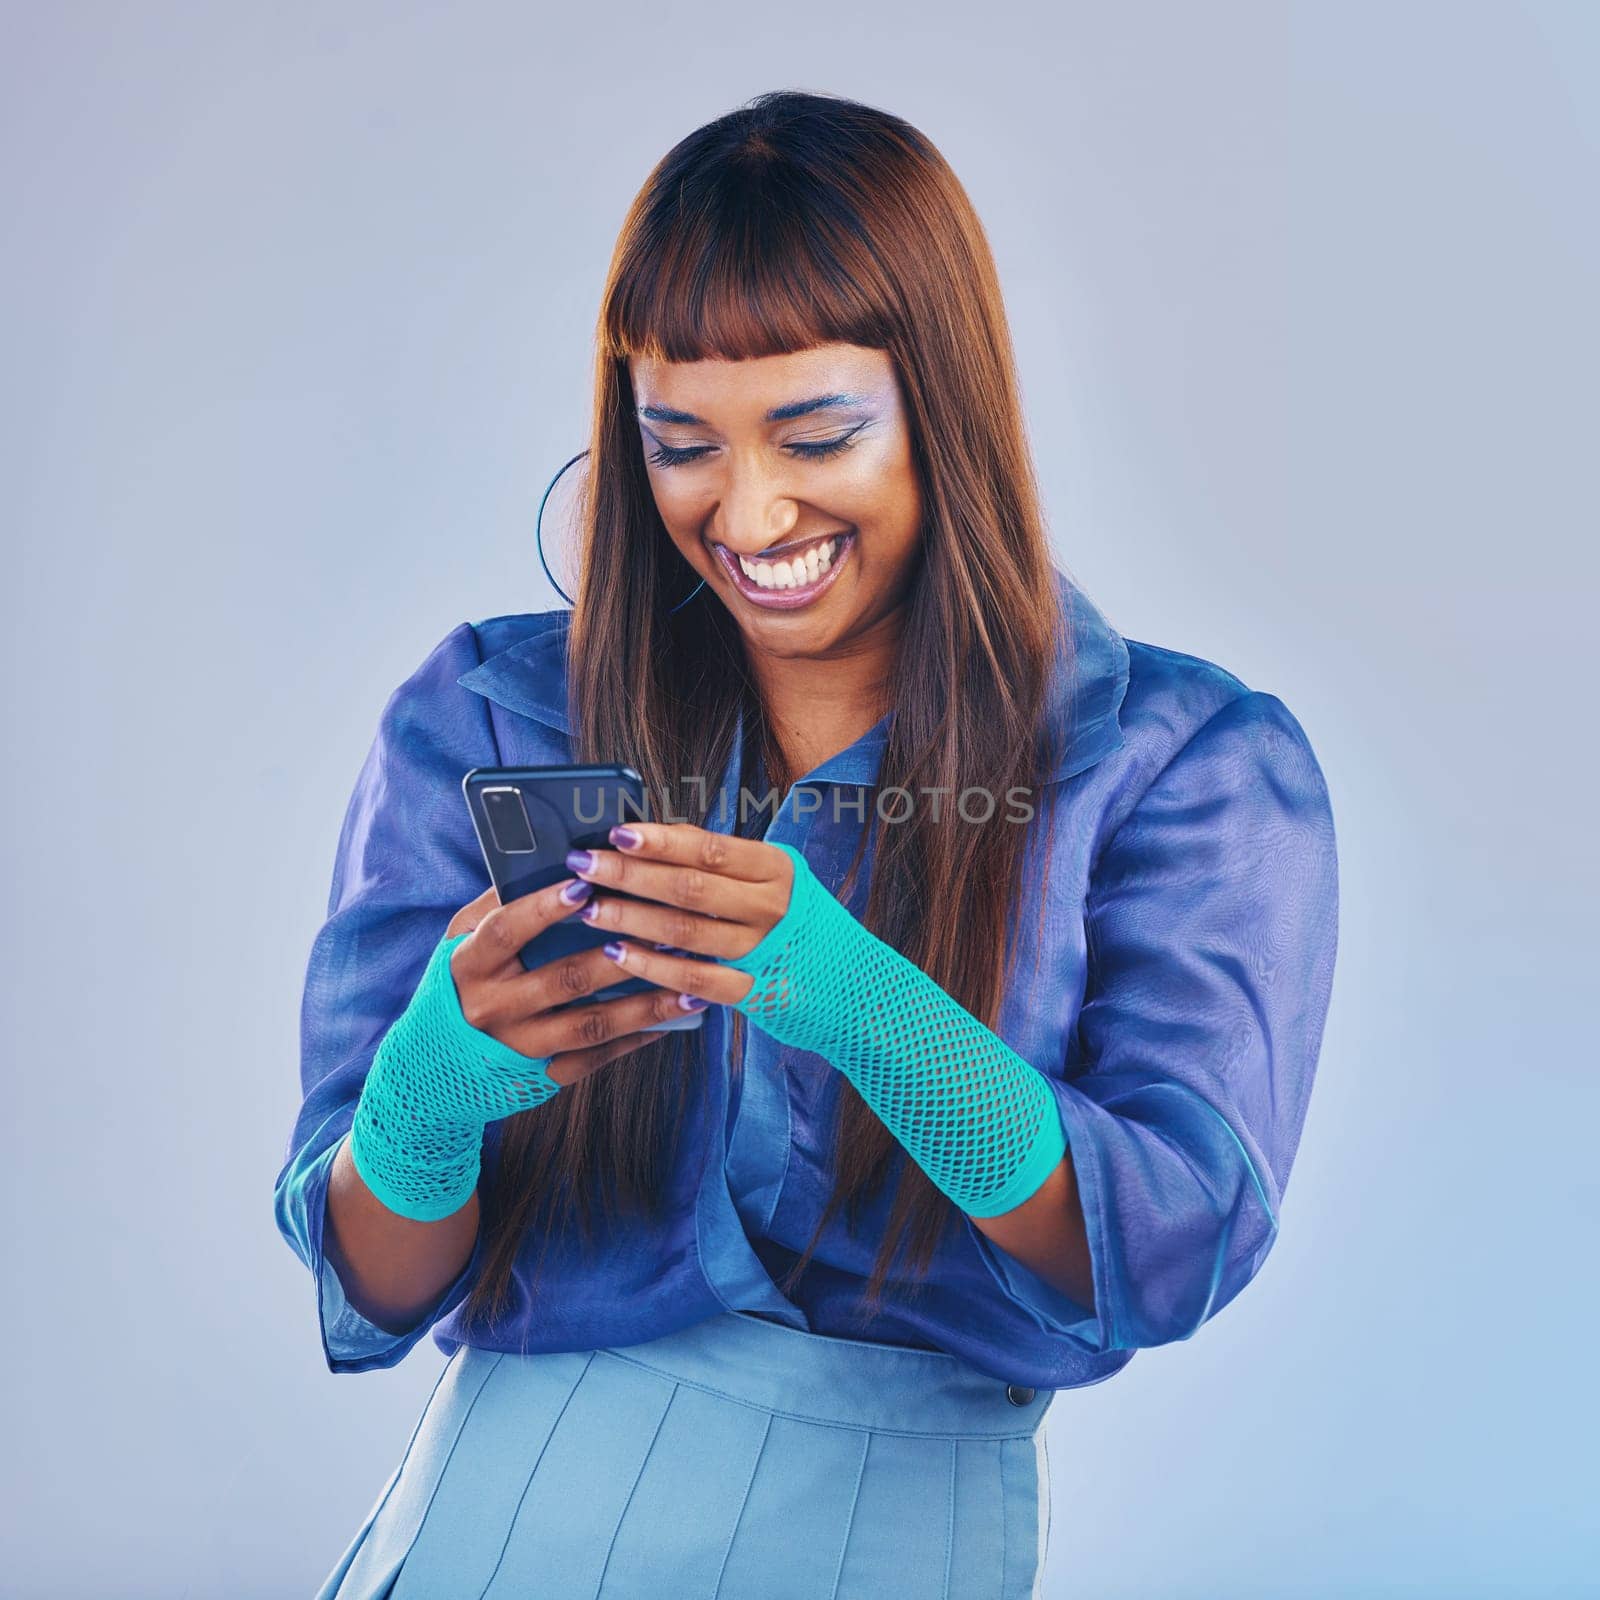 Woman, phone and laughing for funny joke, meme or social media isolated against a studio background. Happy female model smiling and laugh in fashion on mobile smartphone for networking with fun humor.